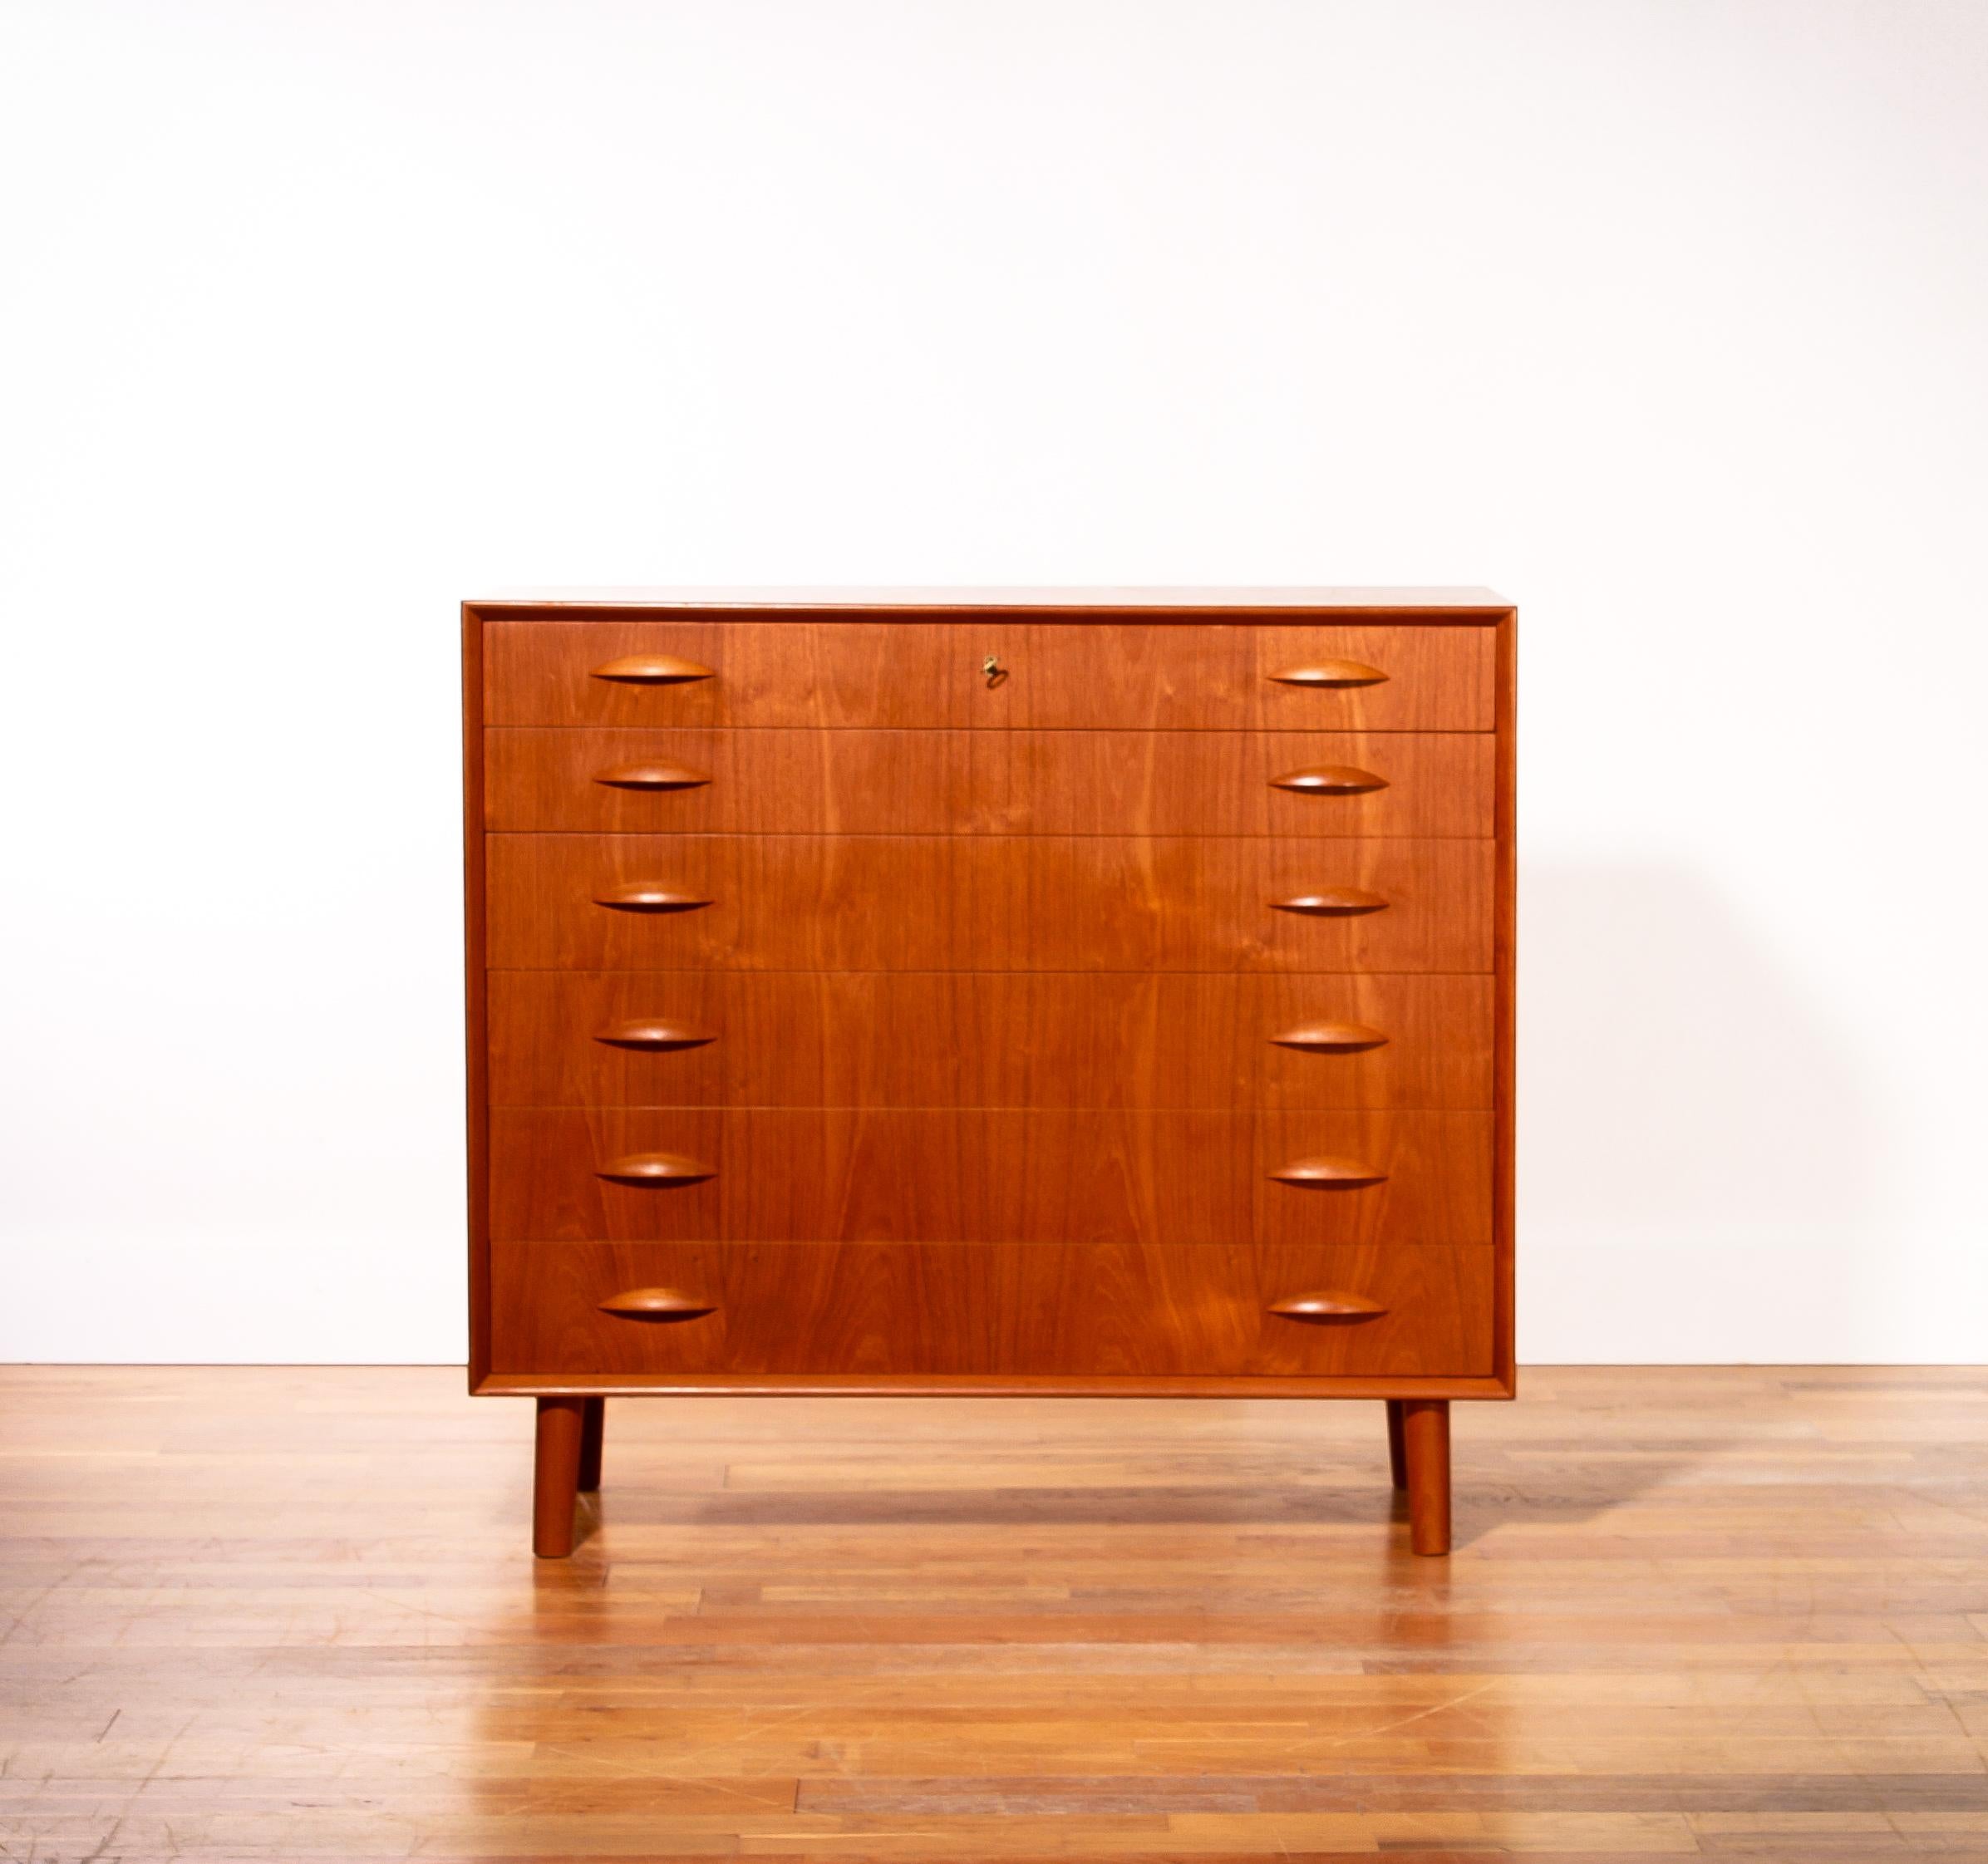 Beautiful cabinet in teak designed by Johannes Sorth and produced by Nexø Møbelfabrik.
This sideboard has six drawers and is in an excellent condition.
The original key included.
Period 1960s.
Dimensions: H 92 cm, W 100 cm, D 45 cm.

 